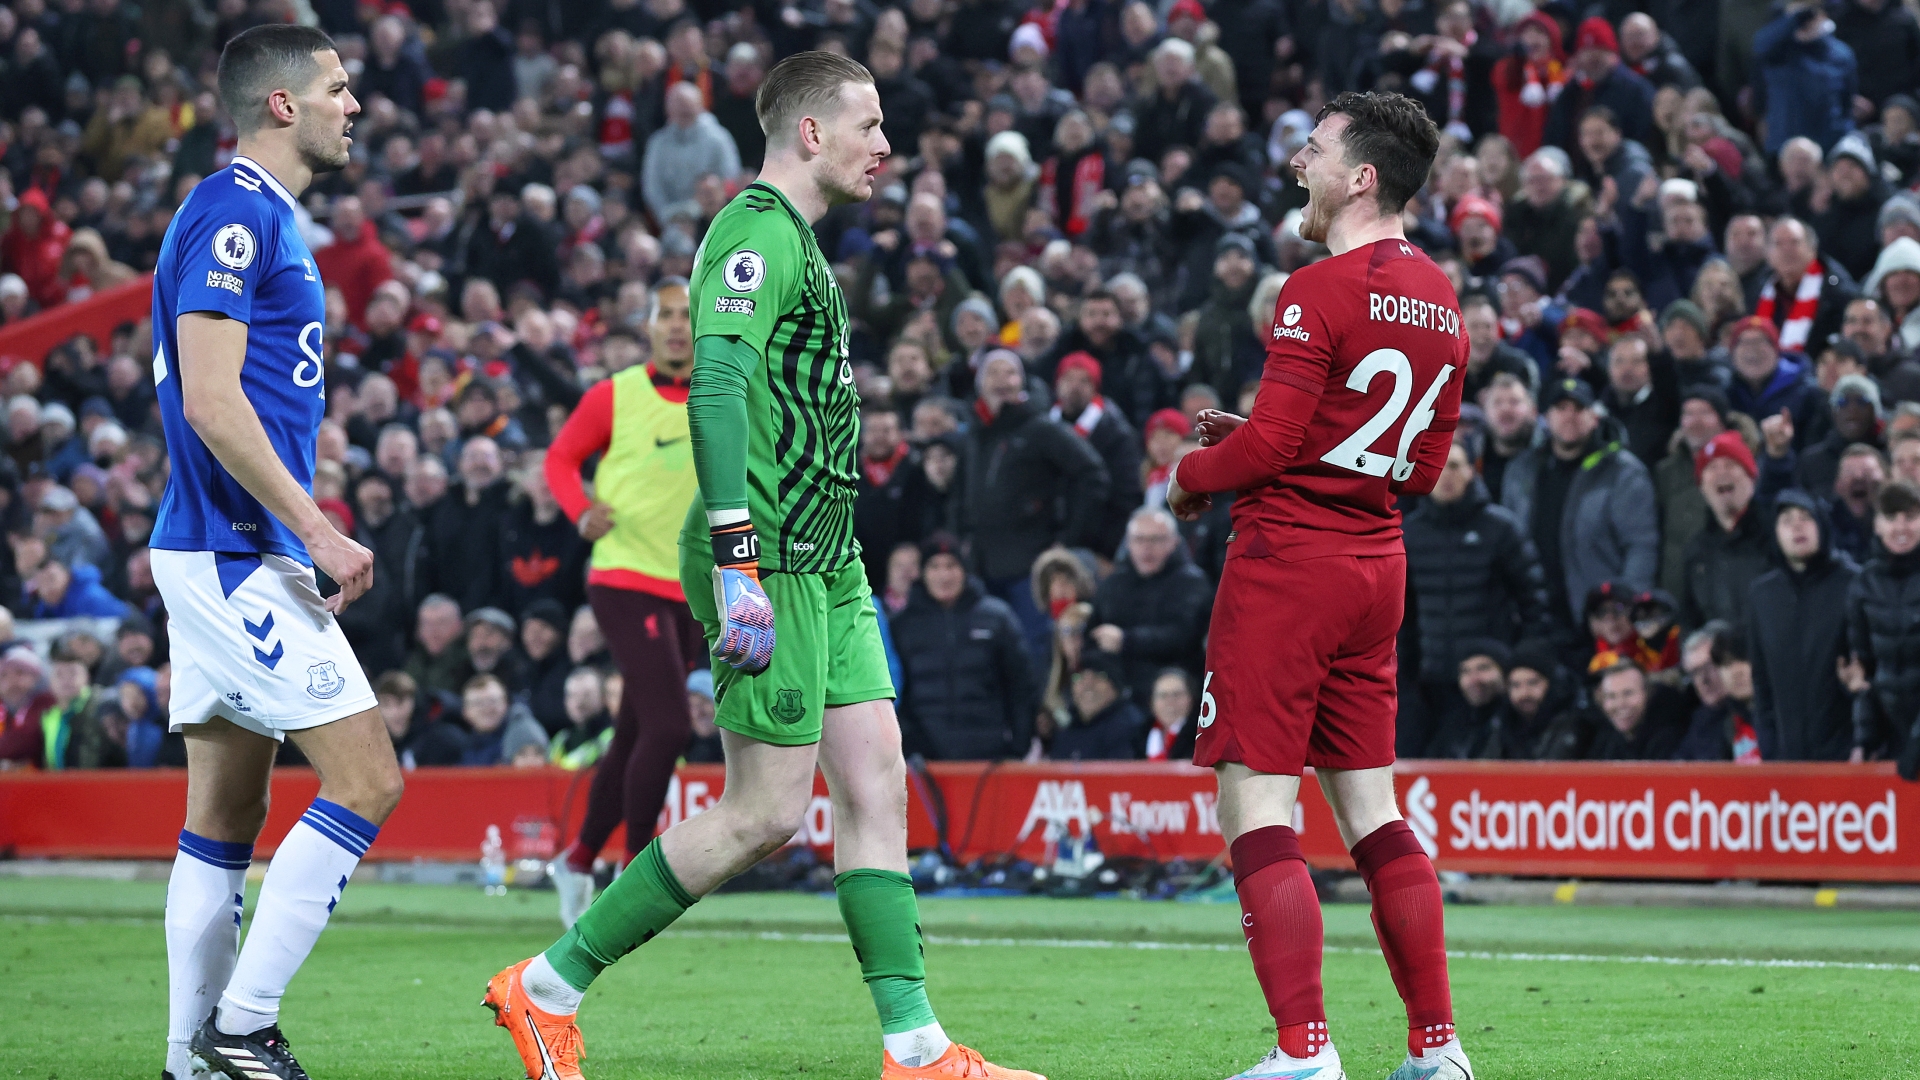 Andy Robertson laughs in Jordan Pickford's face to spark melee tells Everton players and fans 'Liverpool is Red' in Instagram post